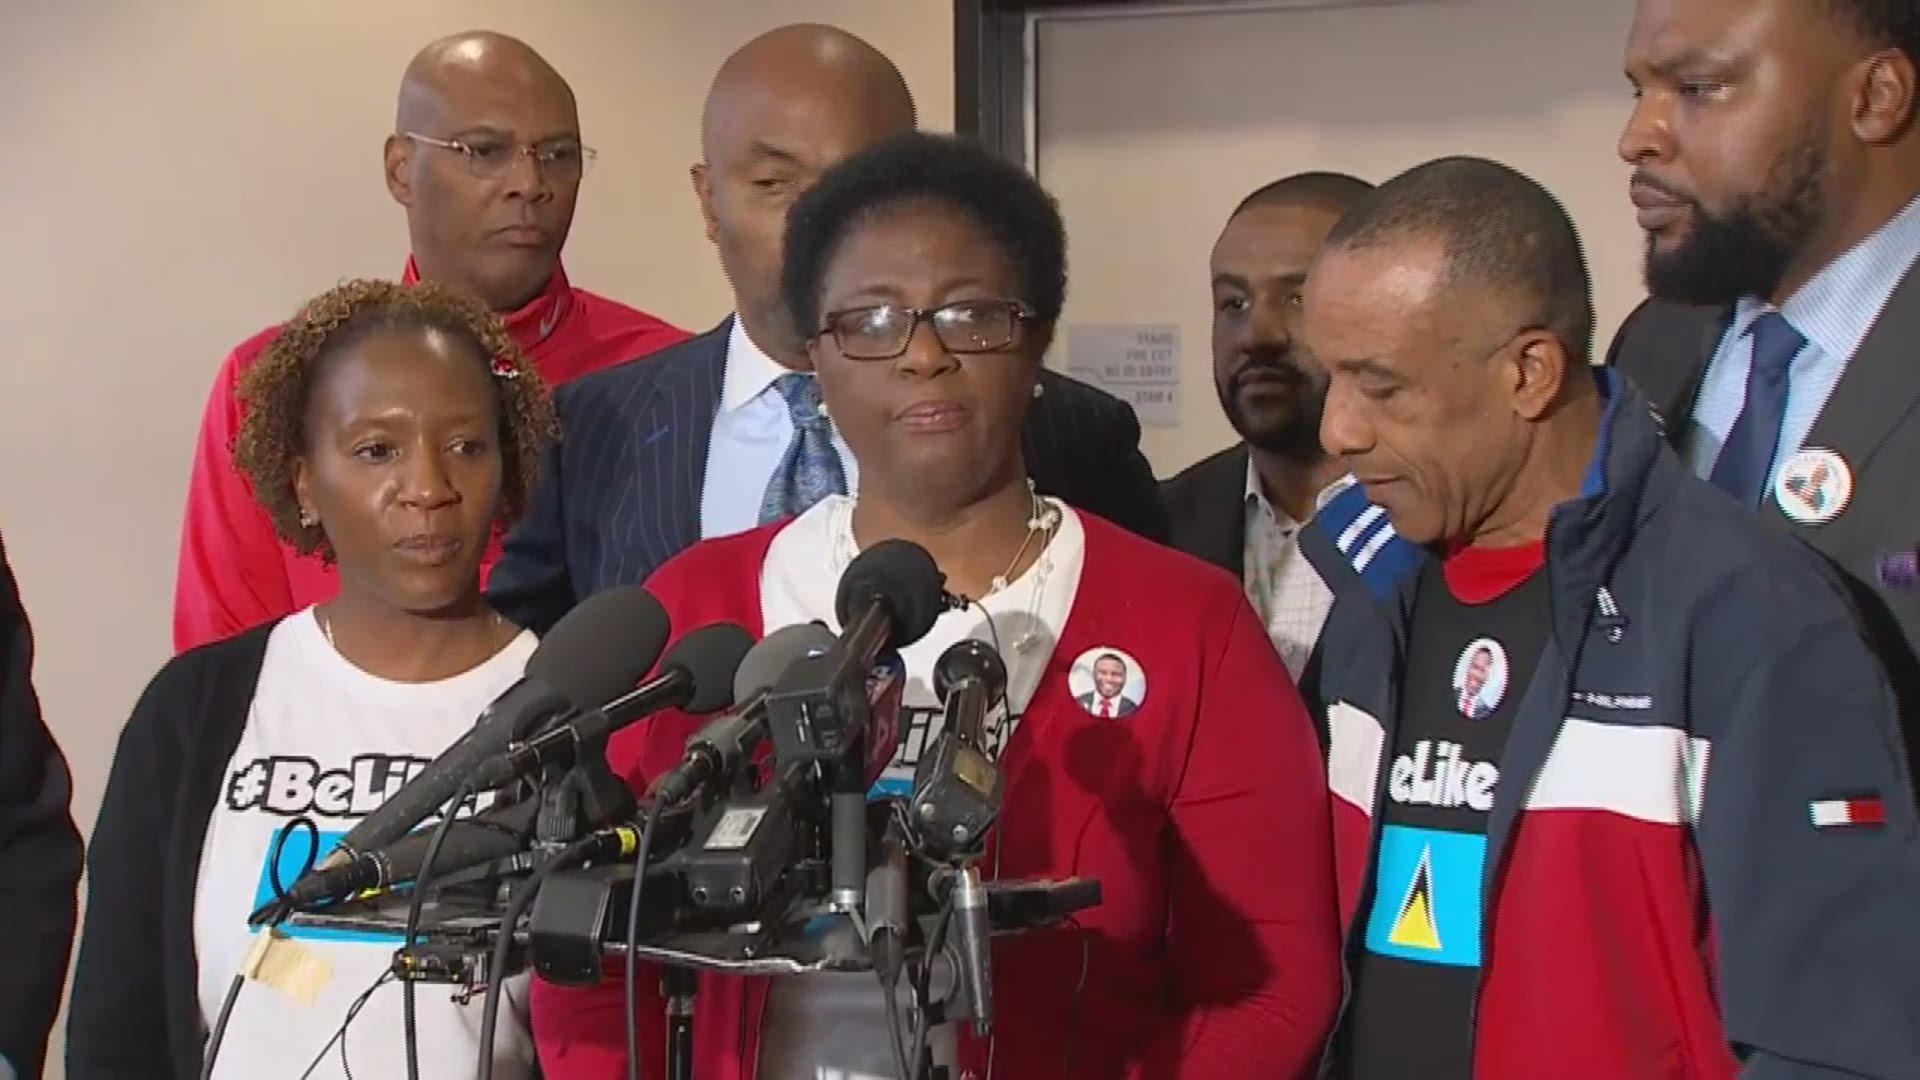 Botham Jean's mother speaks after Officer Amber Guyger's indictment: 'He didn't deserve this'